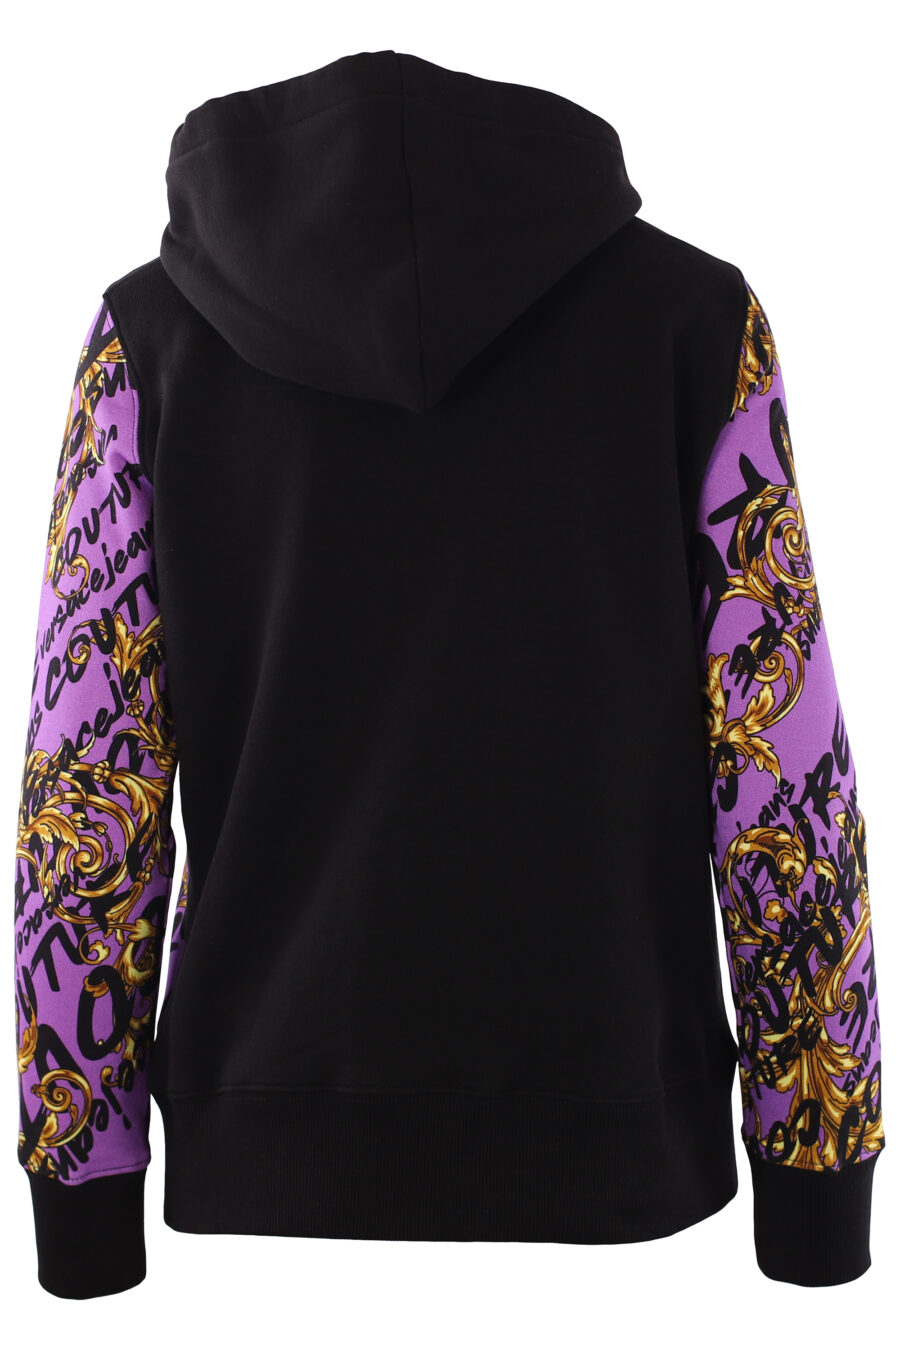 Purple hooded sweatshirt "all over logo" with gold details - IMG 0284